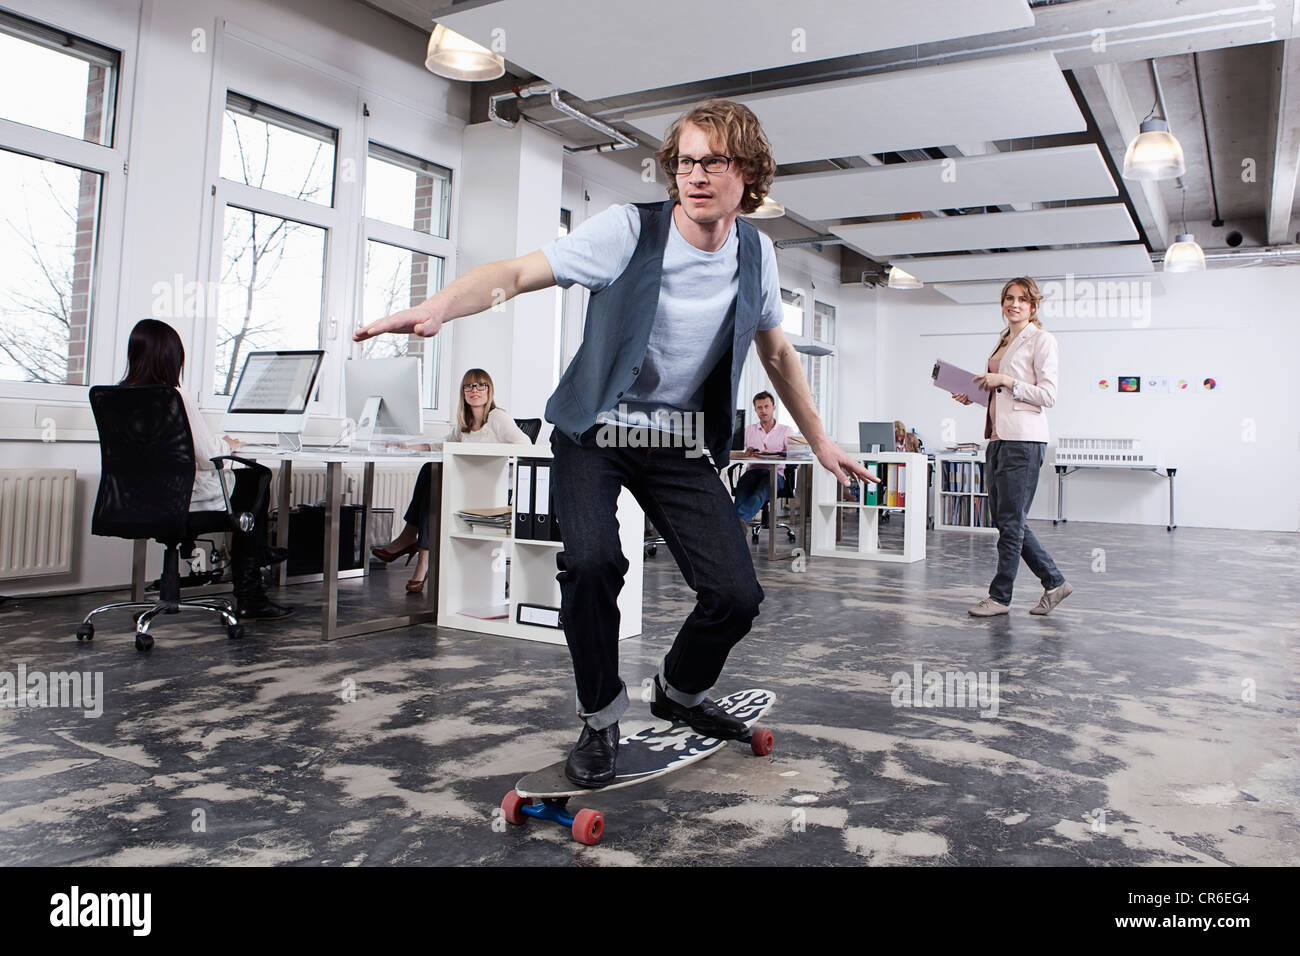 Germany, Bavaria, Munich, Man skate boarding in office while colleagues working in background Stock Photo